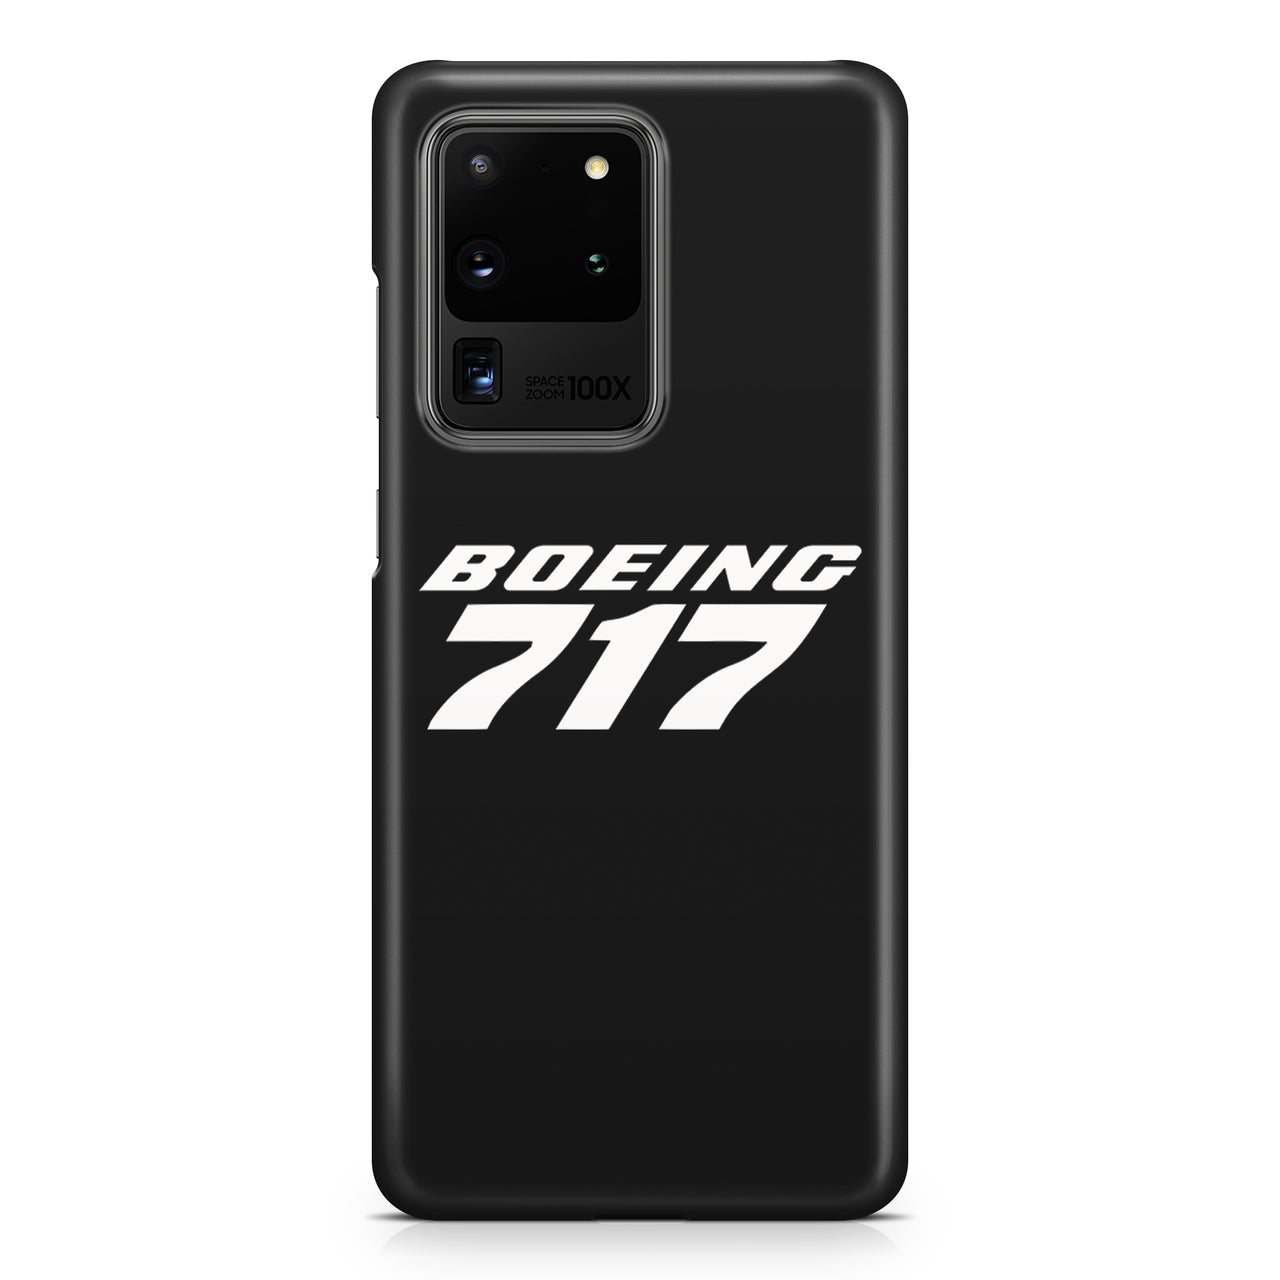 Boeing 717 & Text Samsung A Cases